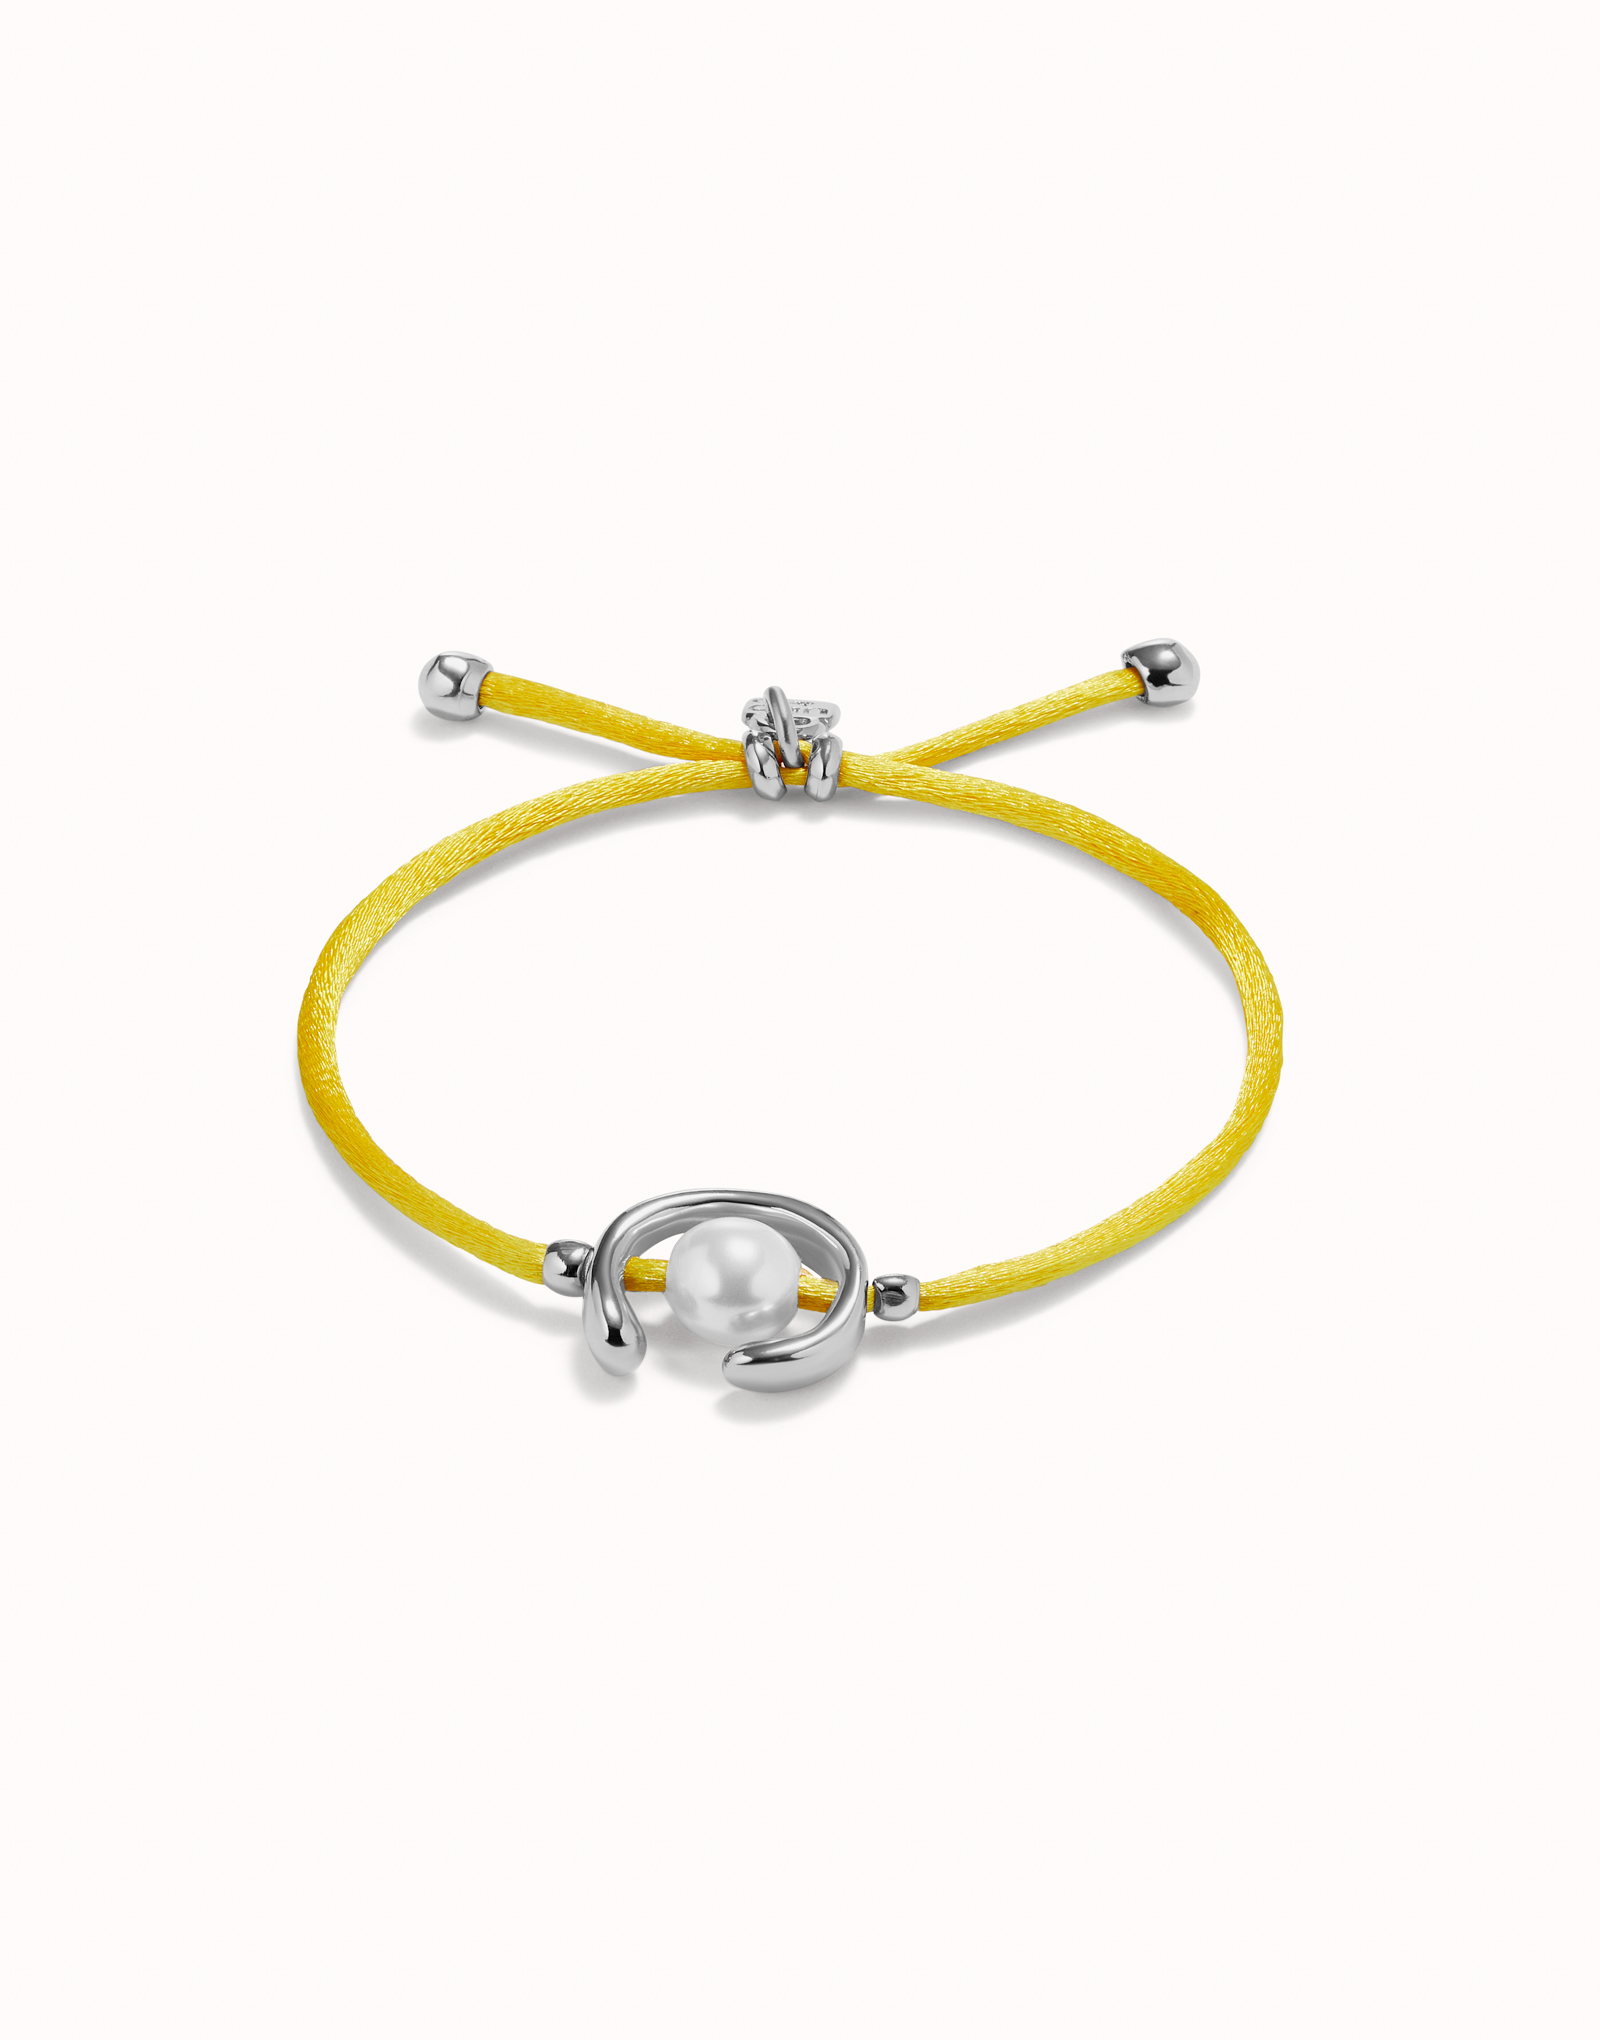 Bracciale in filo giallo con perla shell assortimento placcato argento Sterling., Argent, large image number null